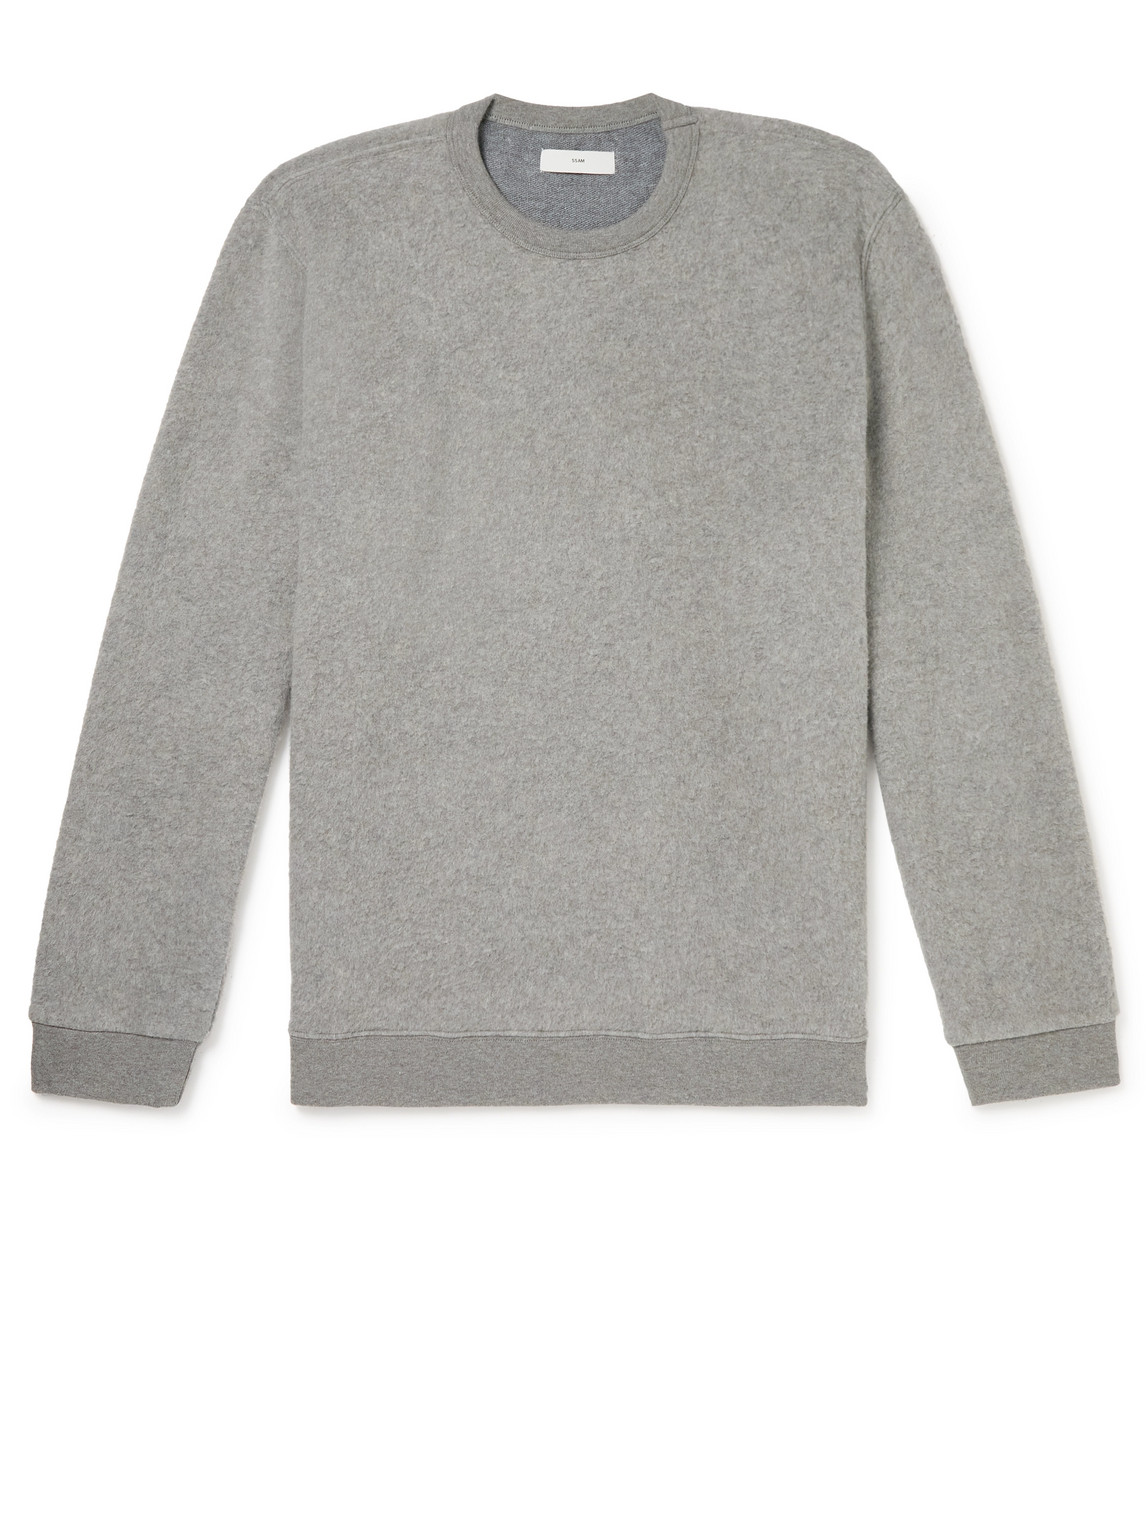 SSAM Andy Brushed Cotton and Camel Hair-Blend Sweatshirt